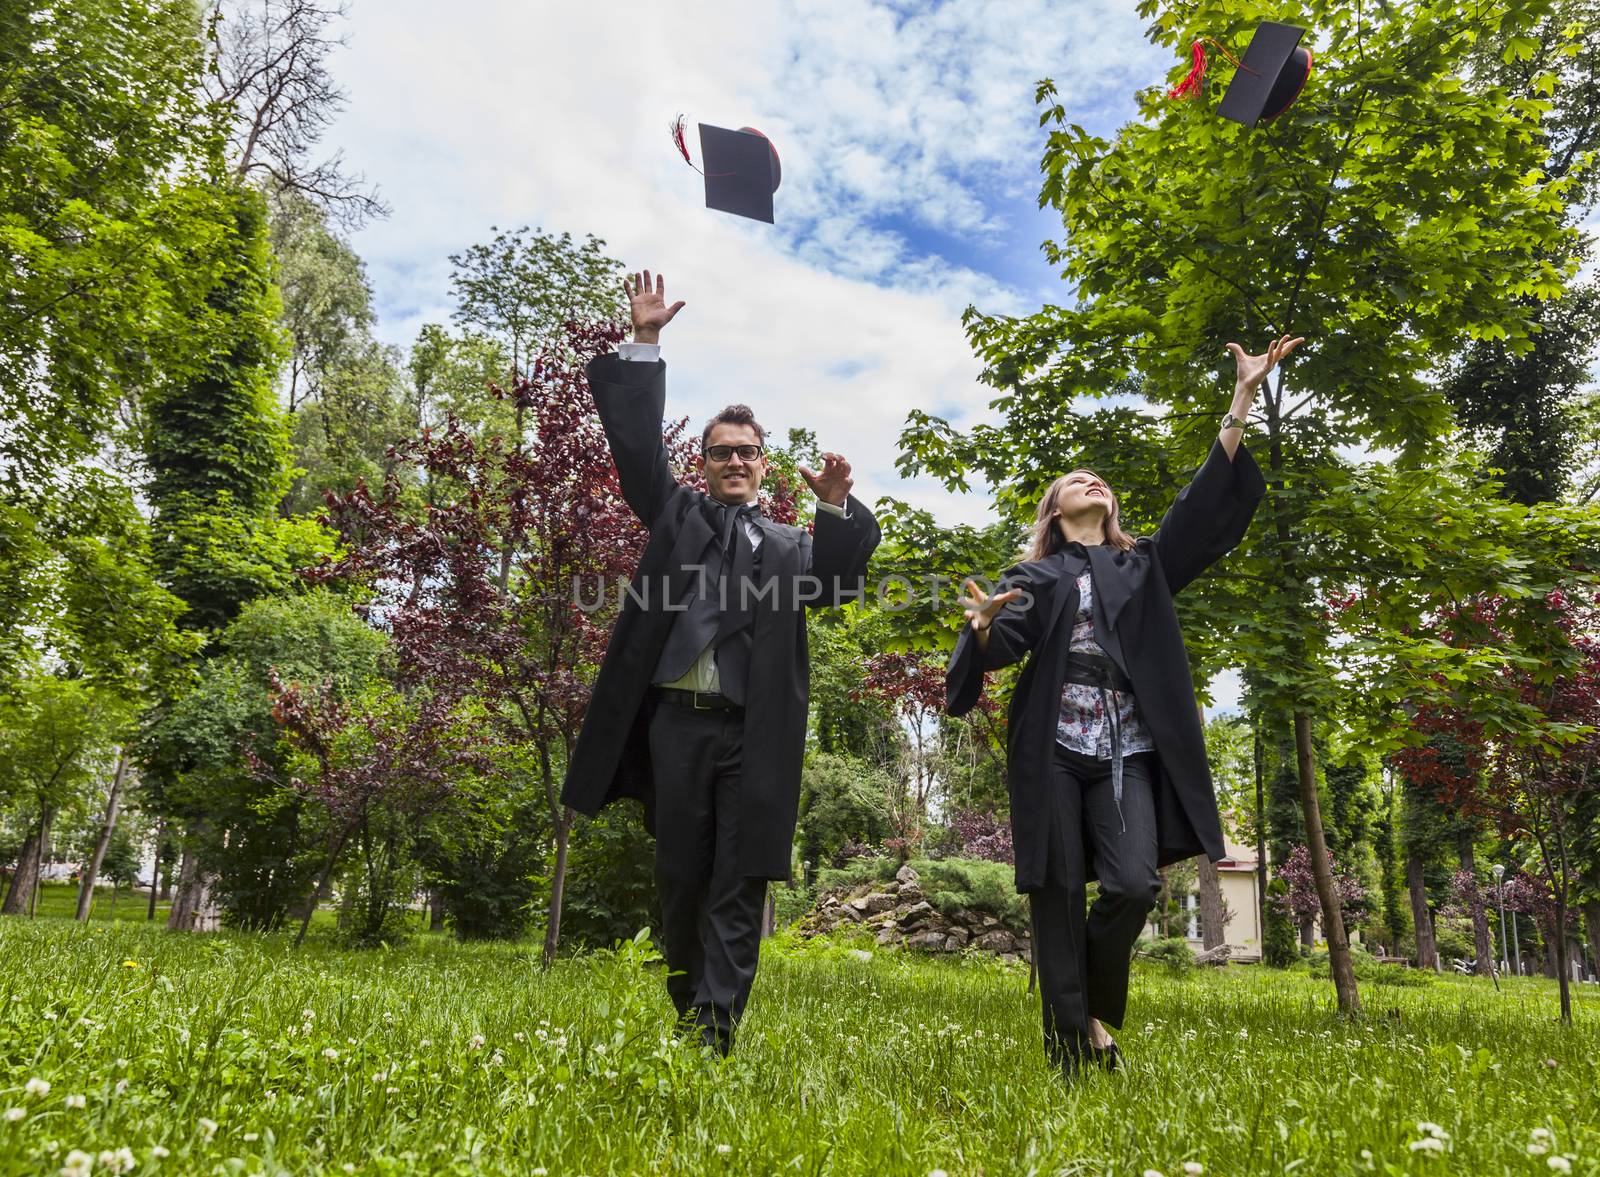 Happy couple in the graduation day running in a park and throwing  their hats up.